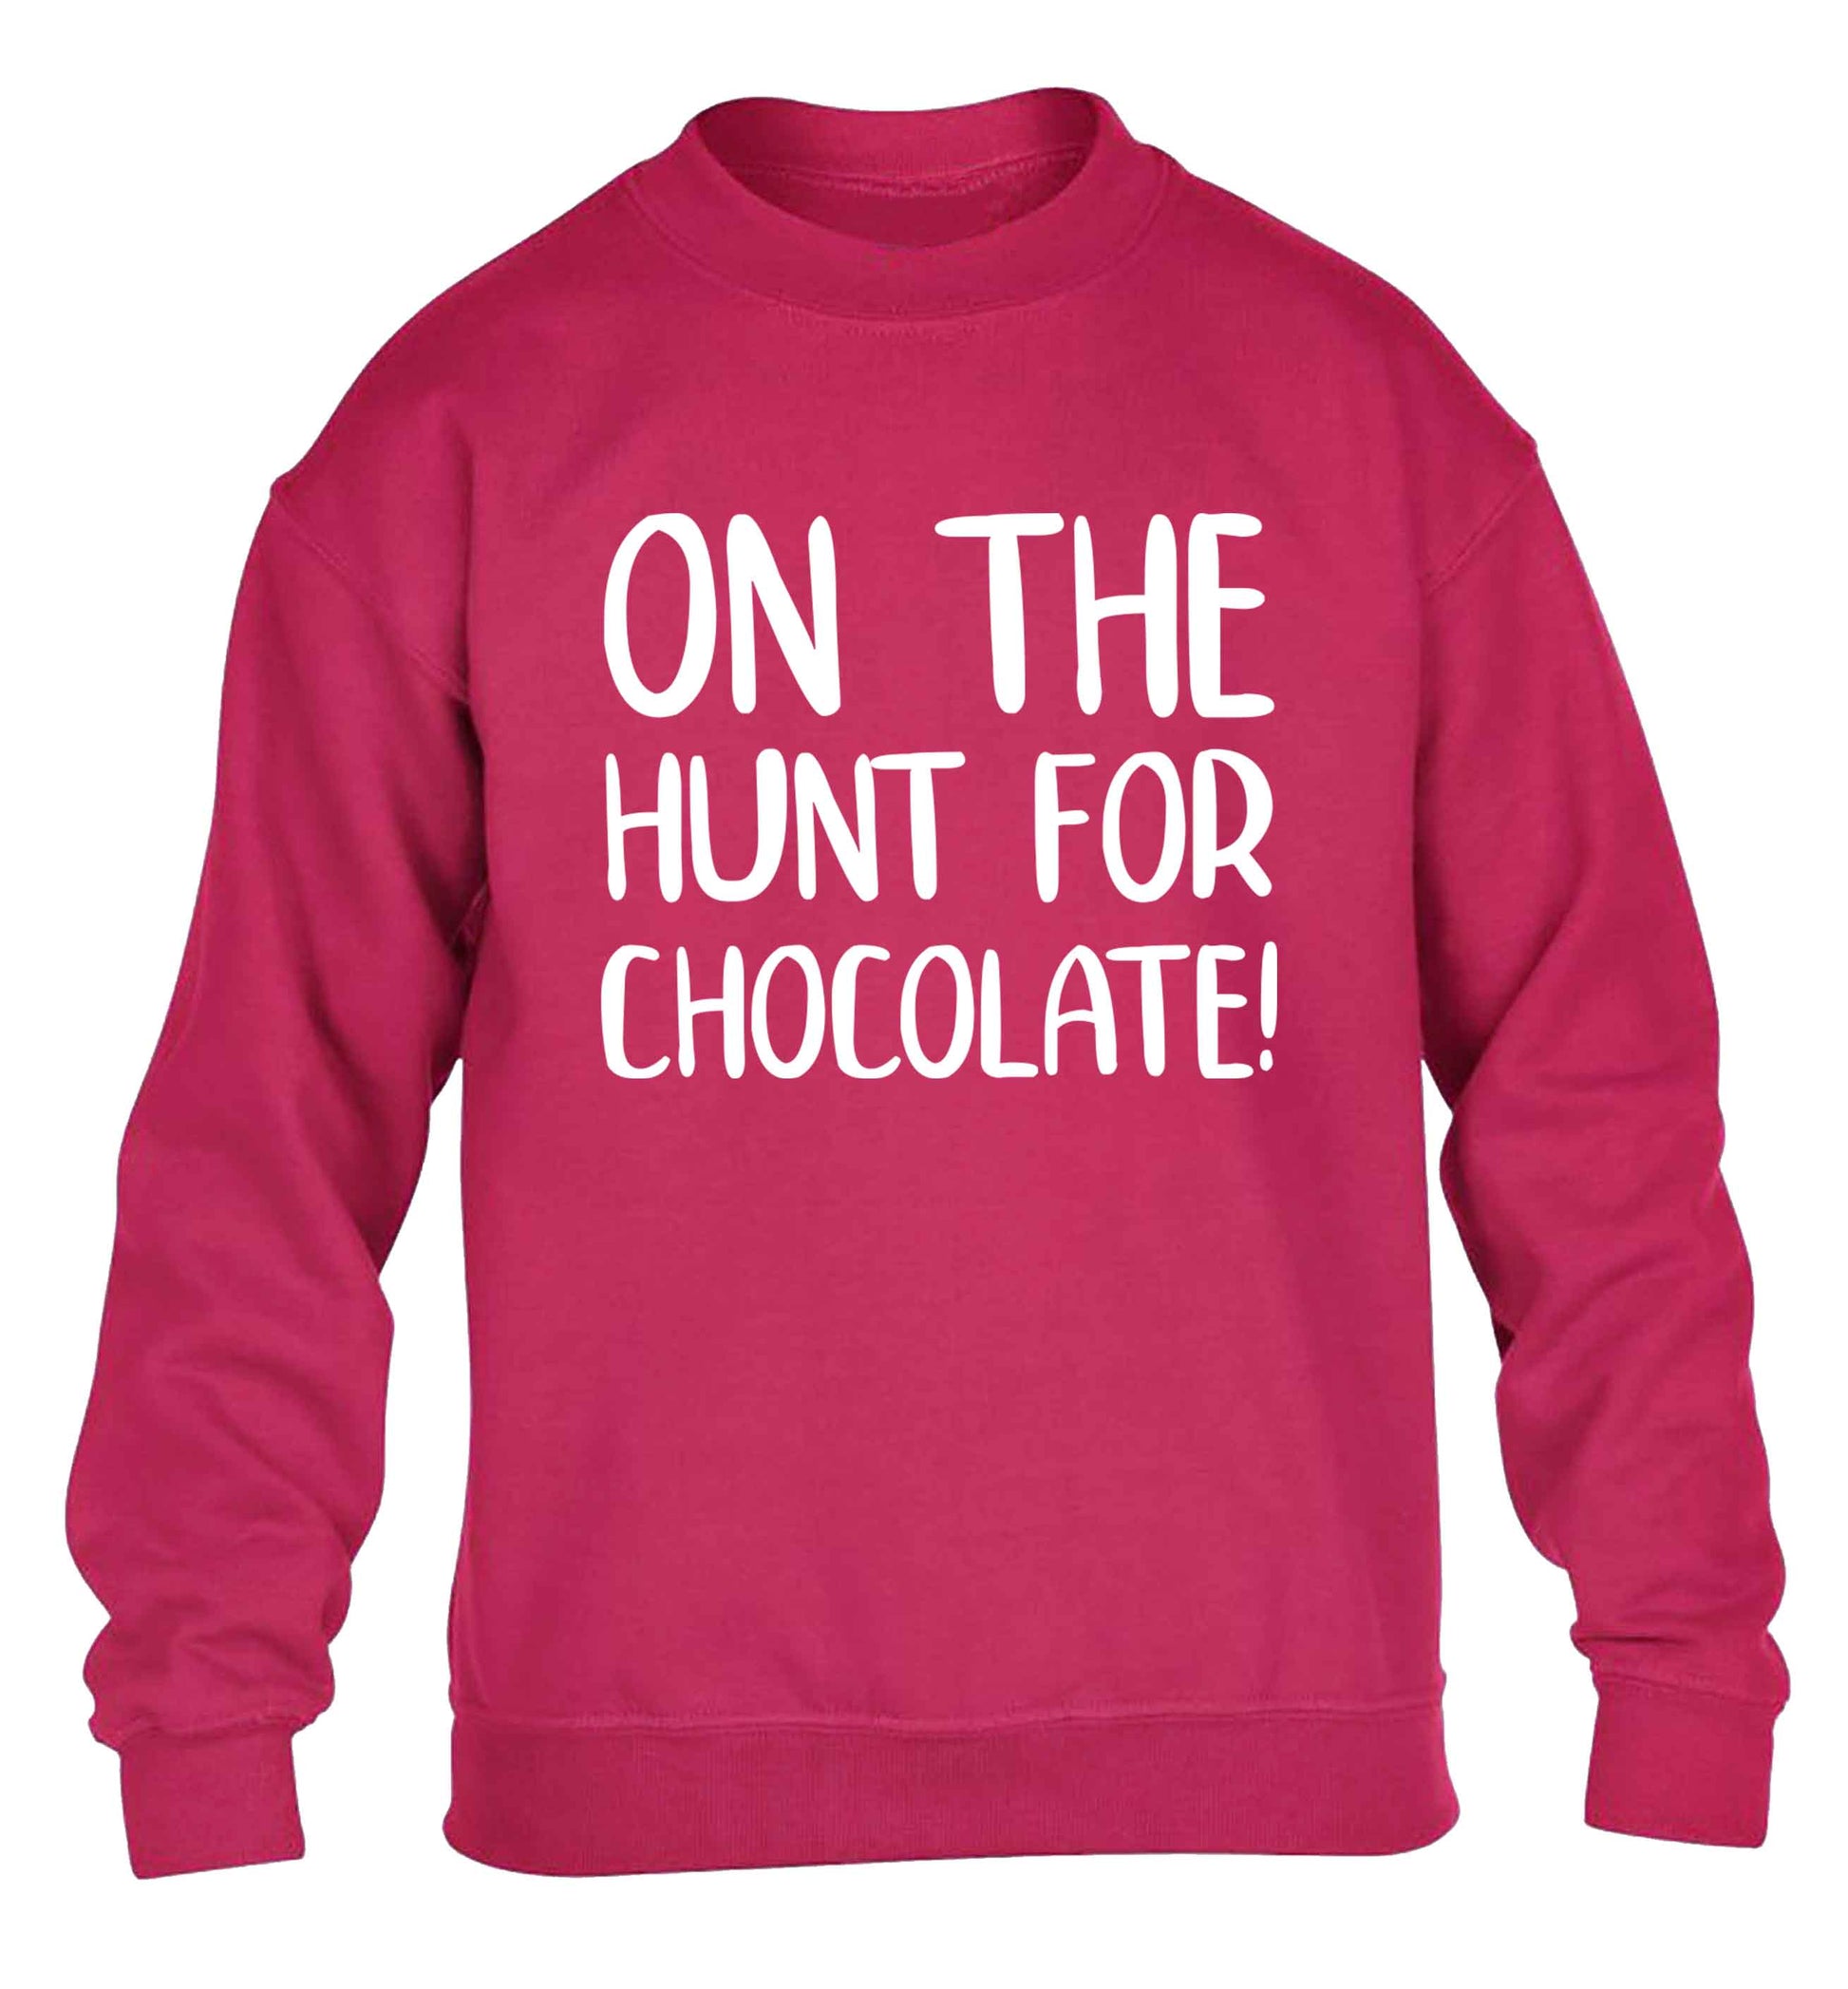 On the hunt for chocolate! children's pink sweater 12-13 Years